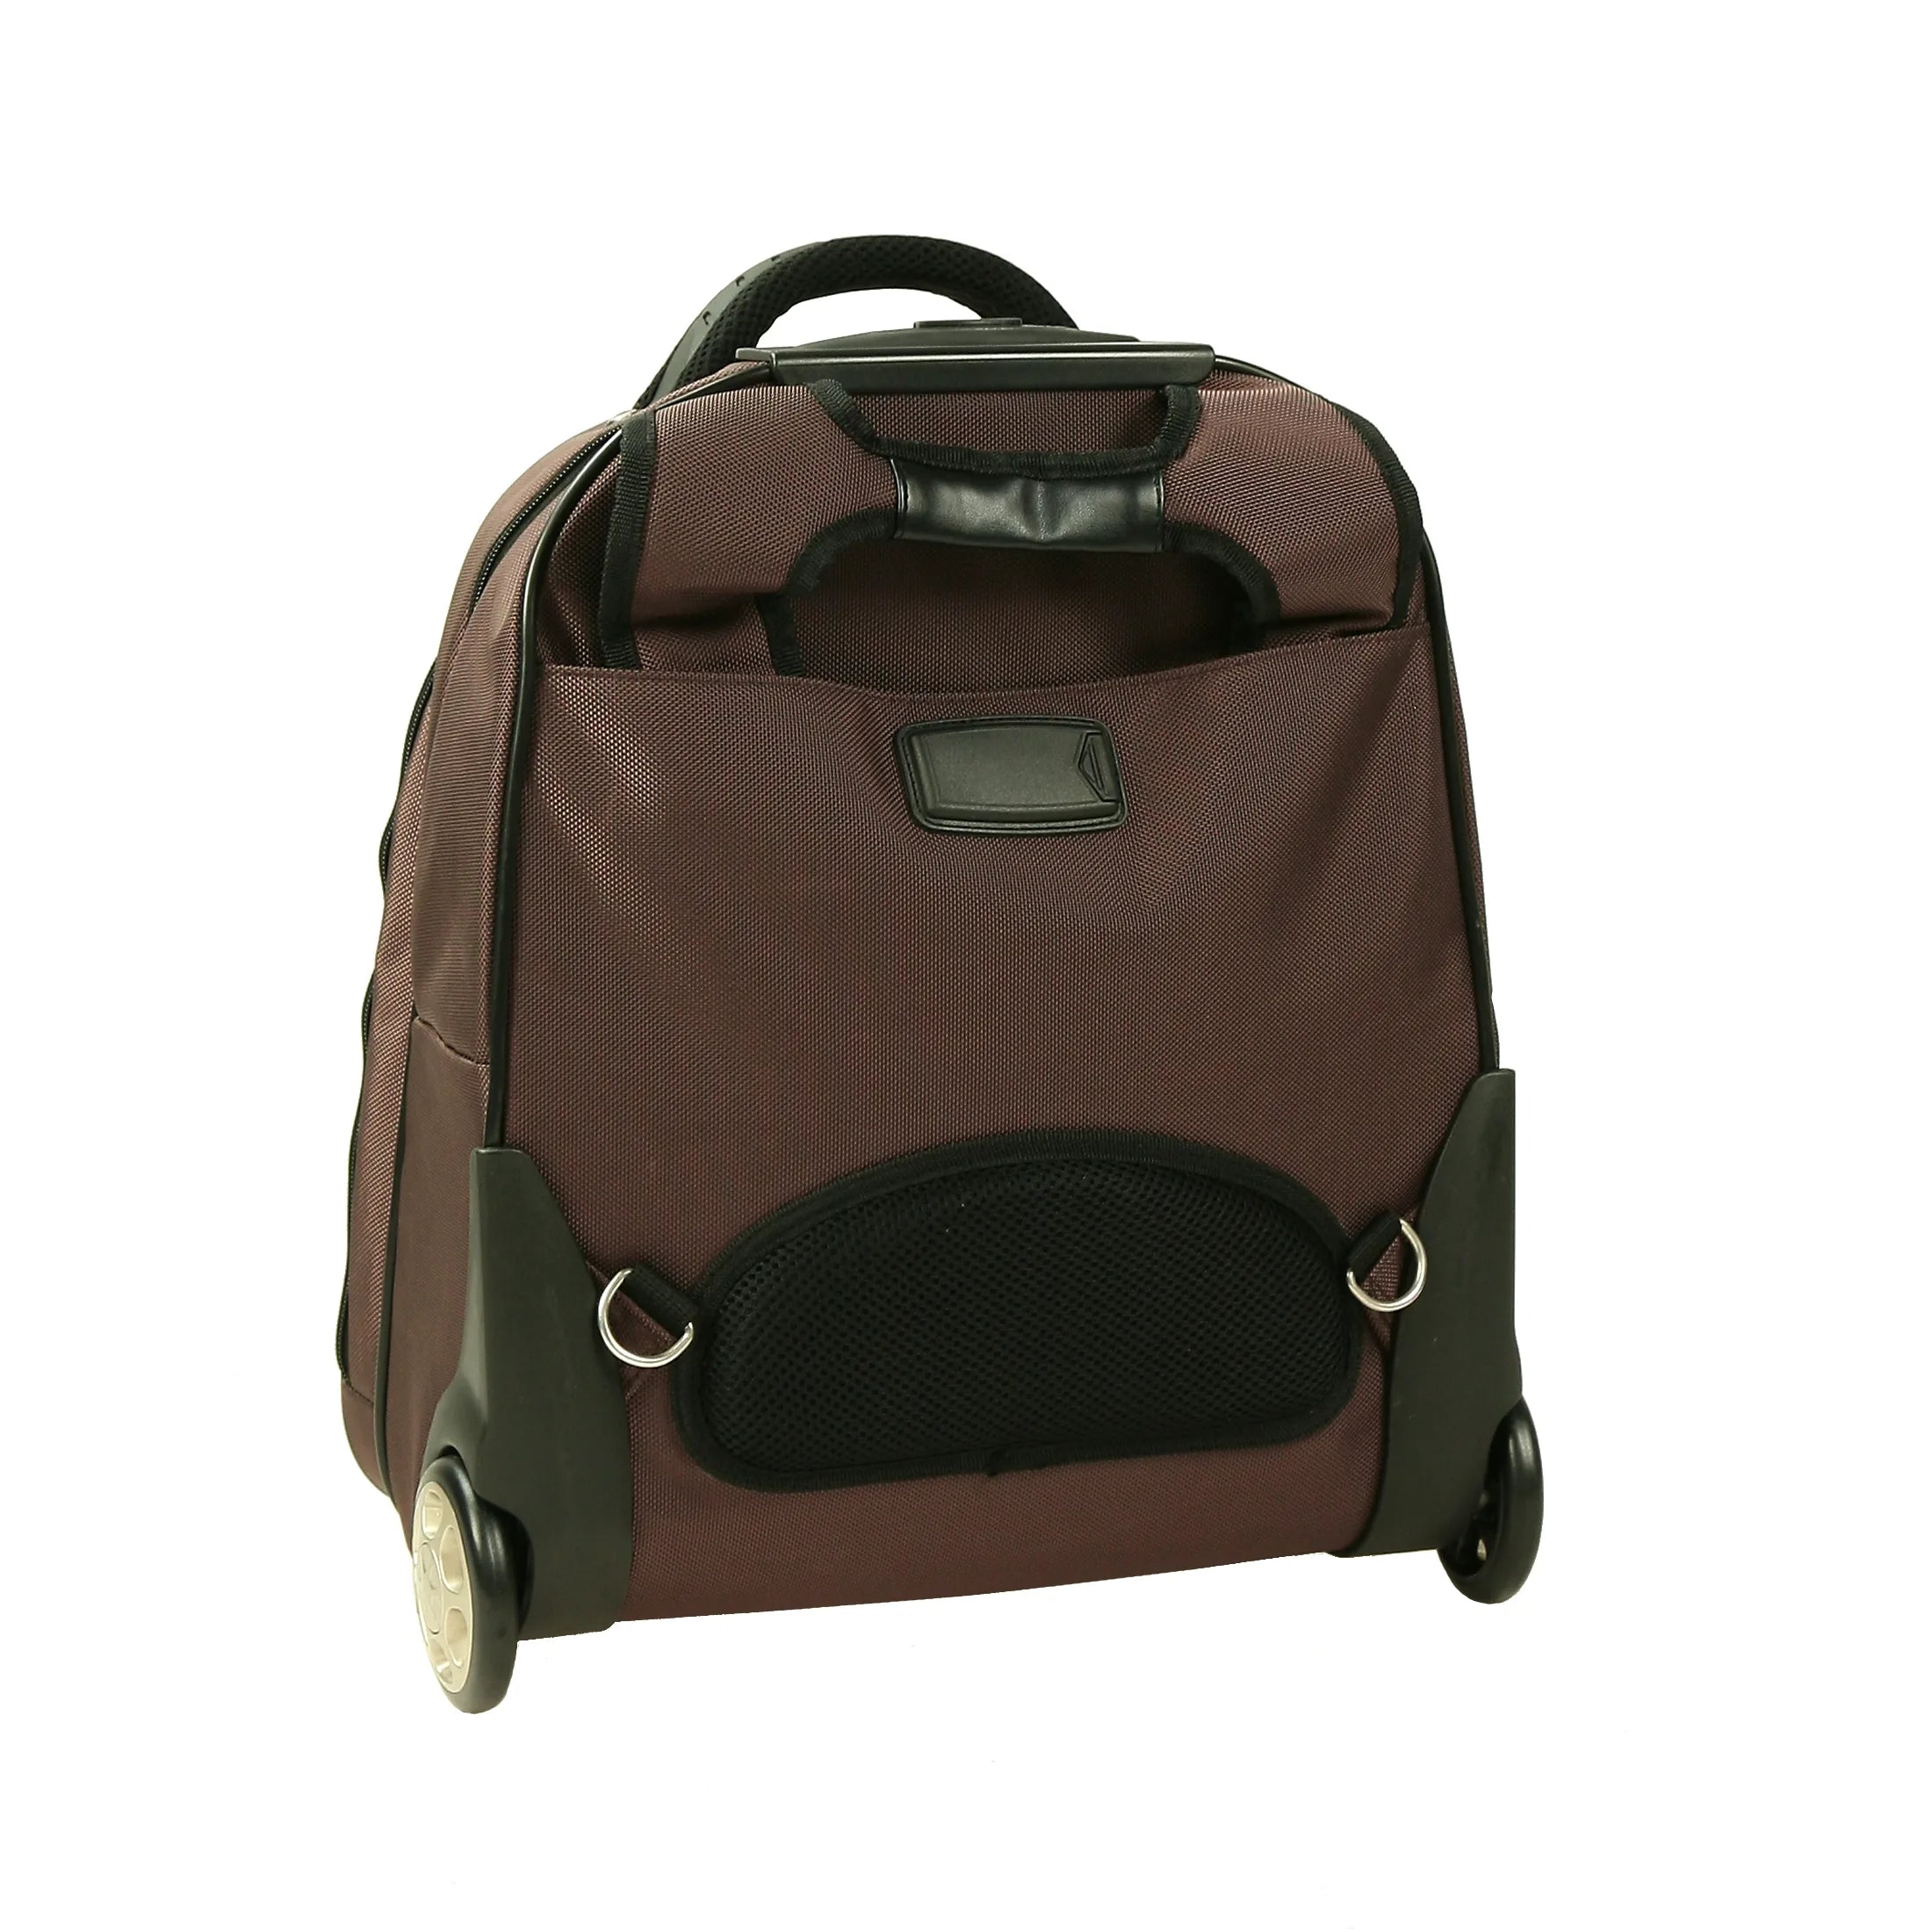 Dermata Business Mobile Office with backpack function - brown